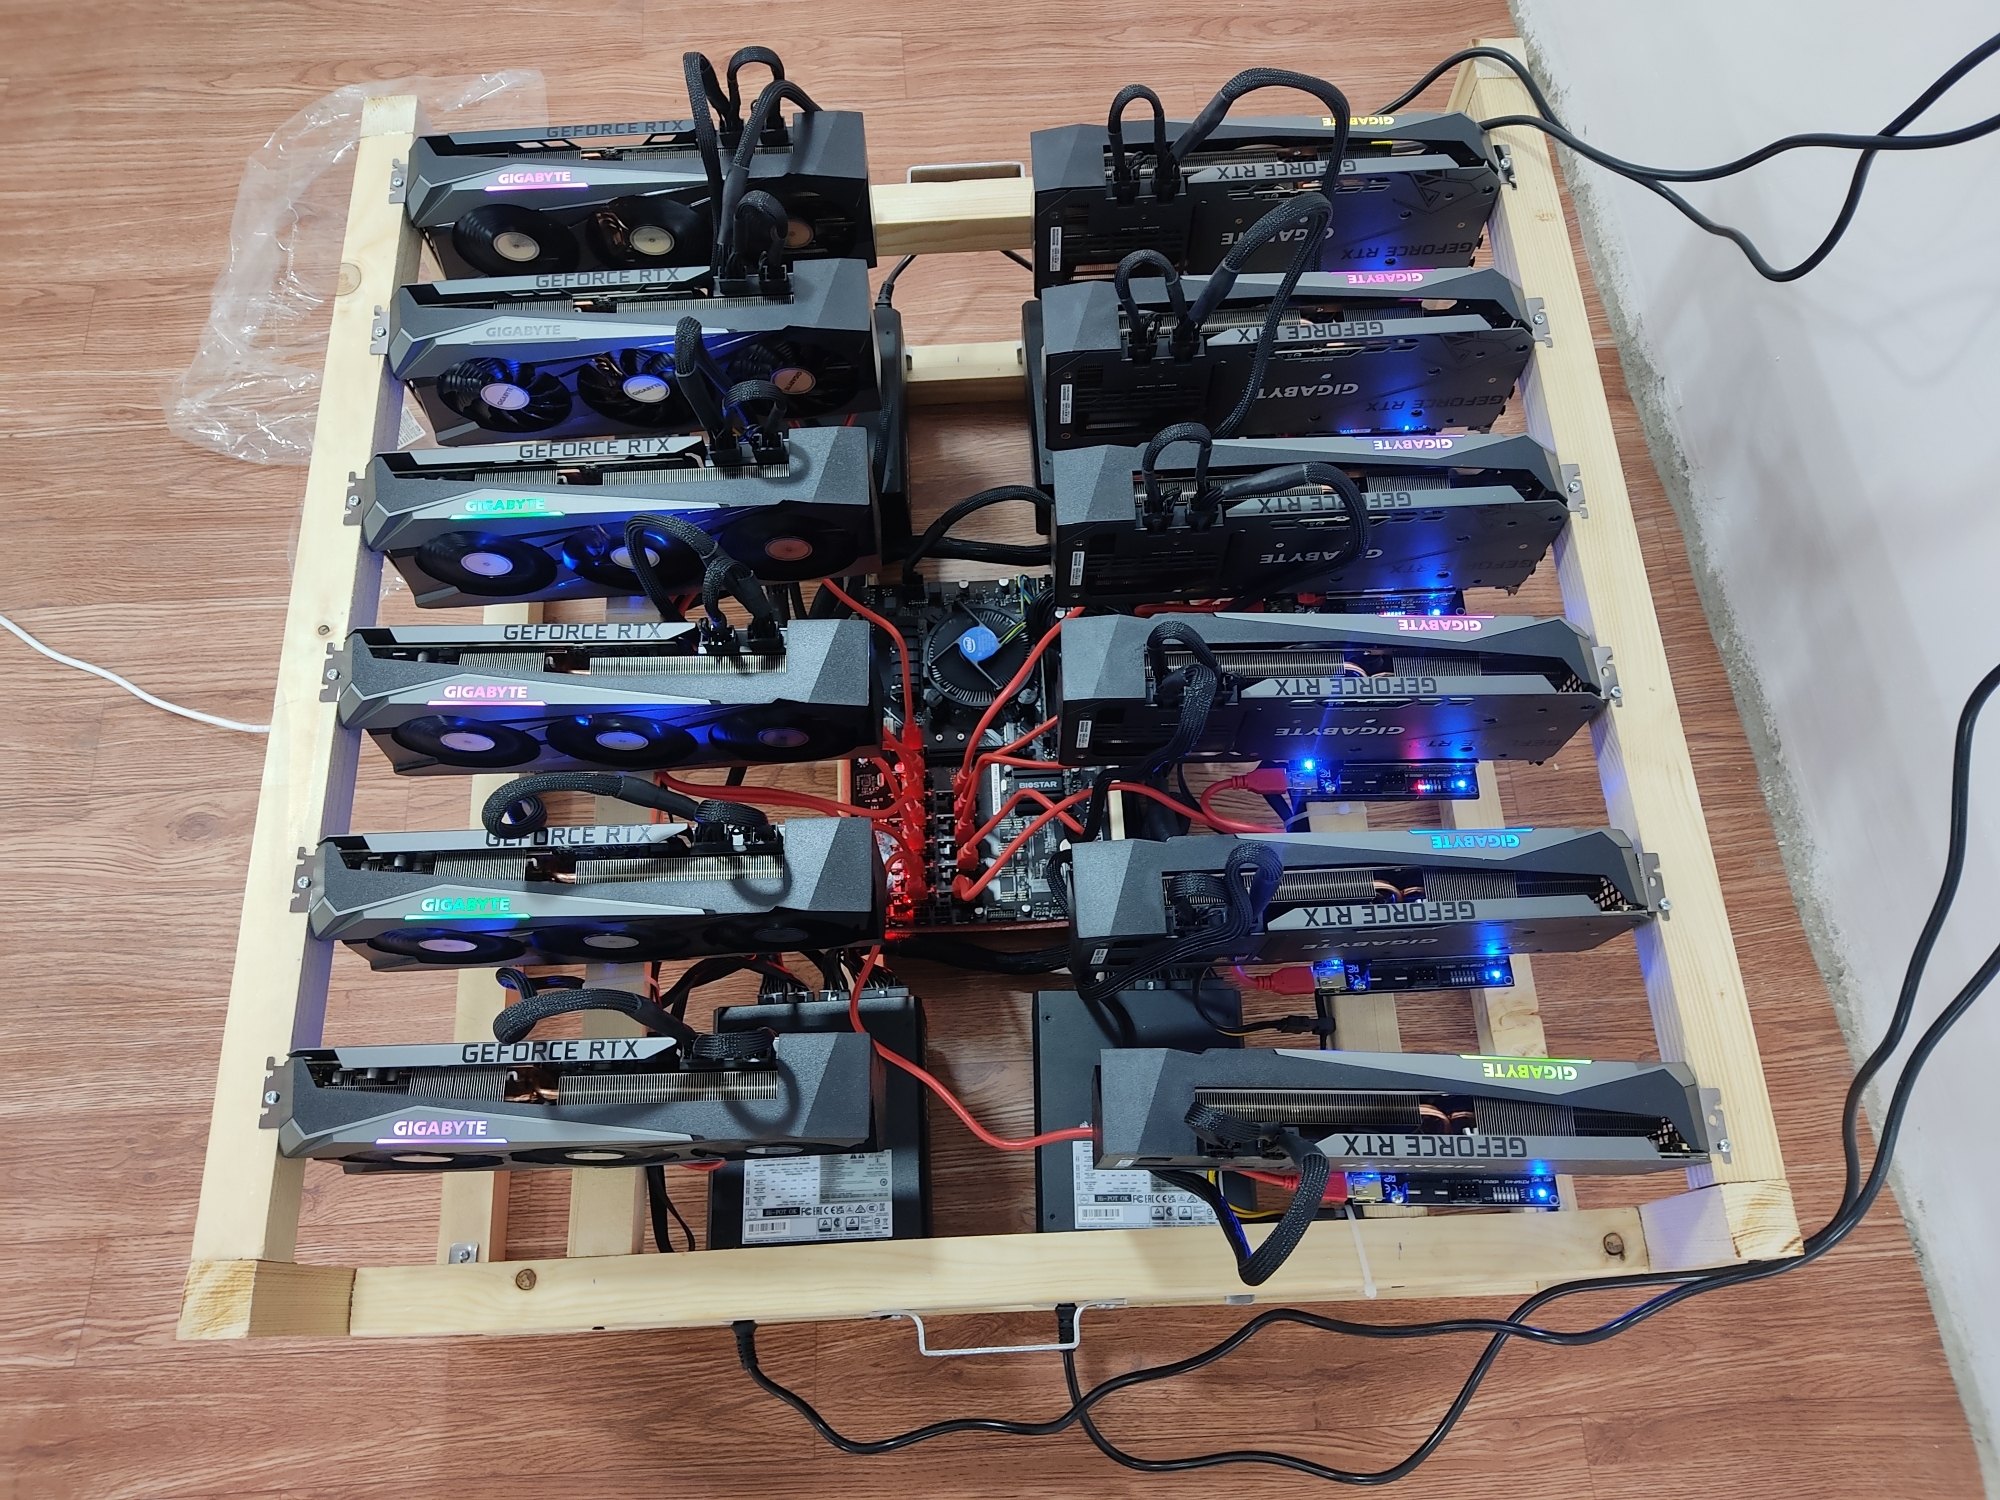 Awesome Miner VS Mining Rig Rentals - compare differences & reviews?